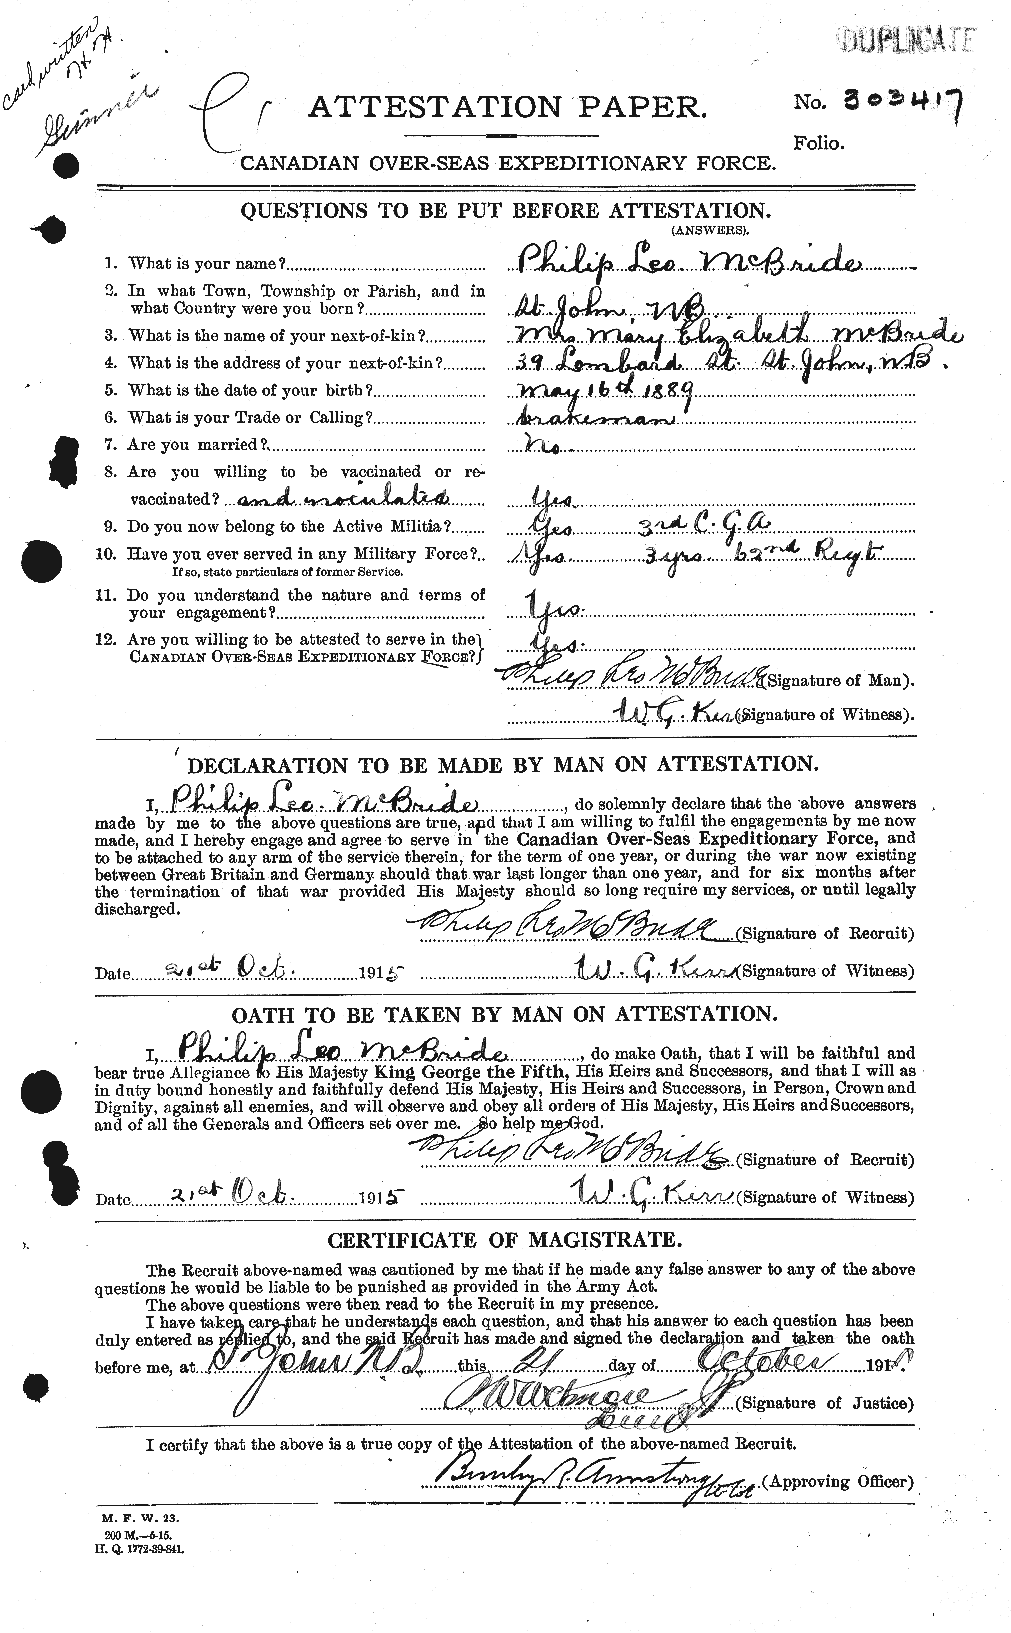 Personnel Records of the First World War - CEF 131752a